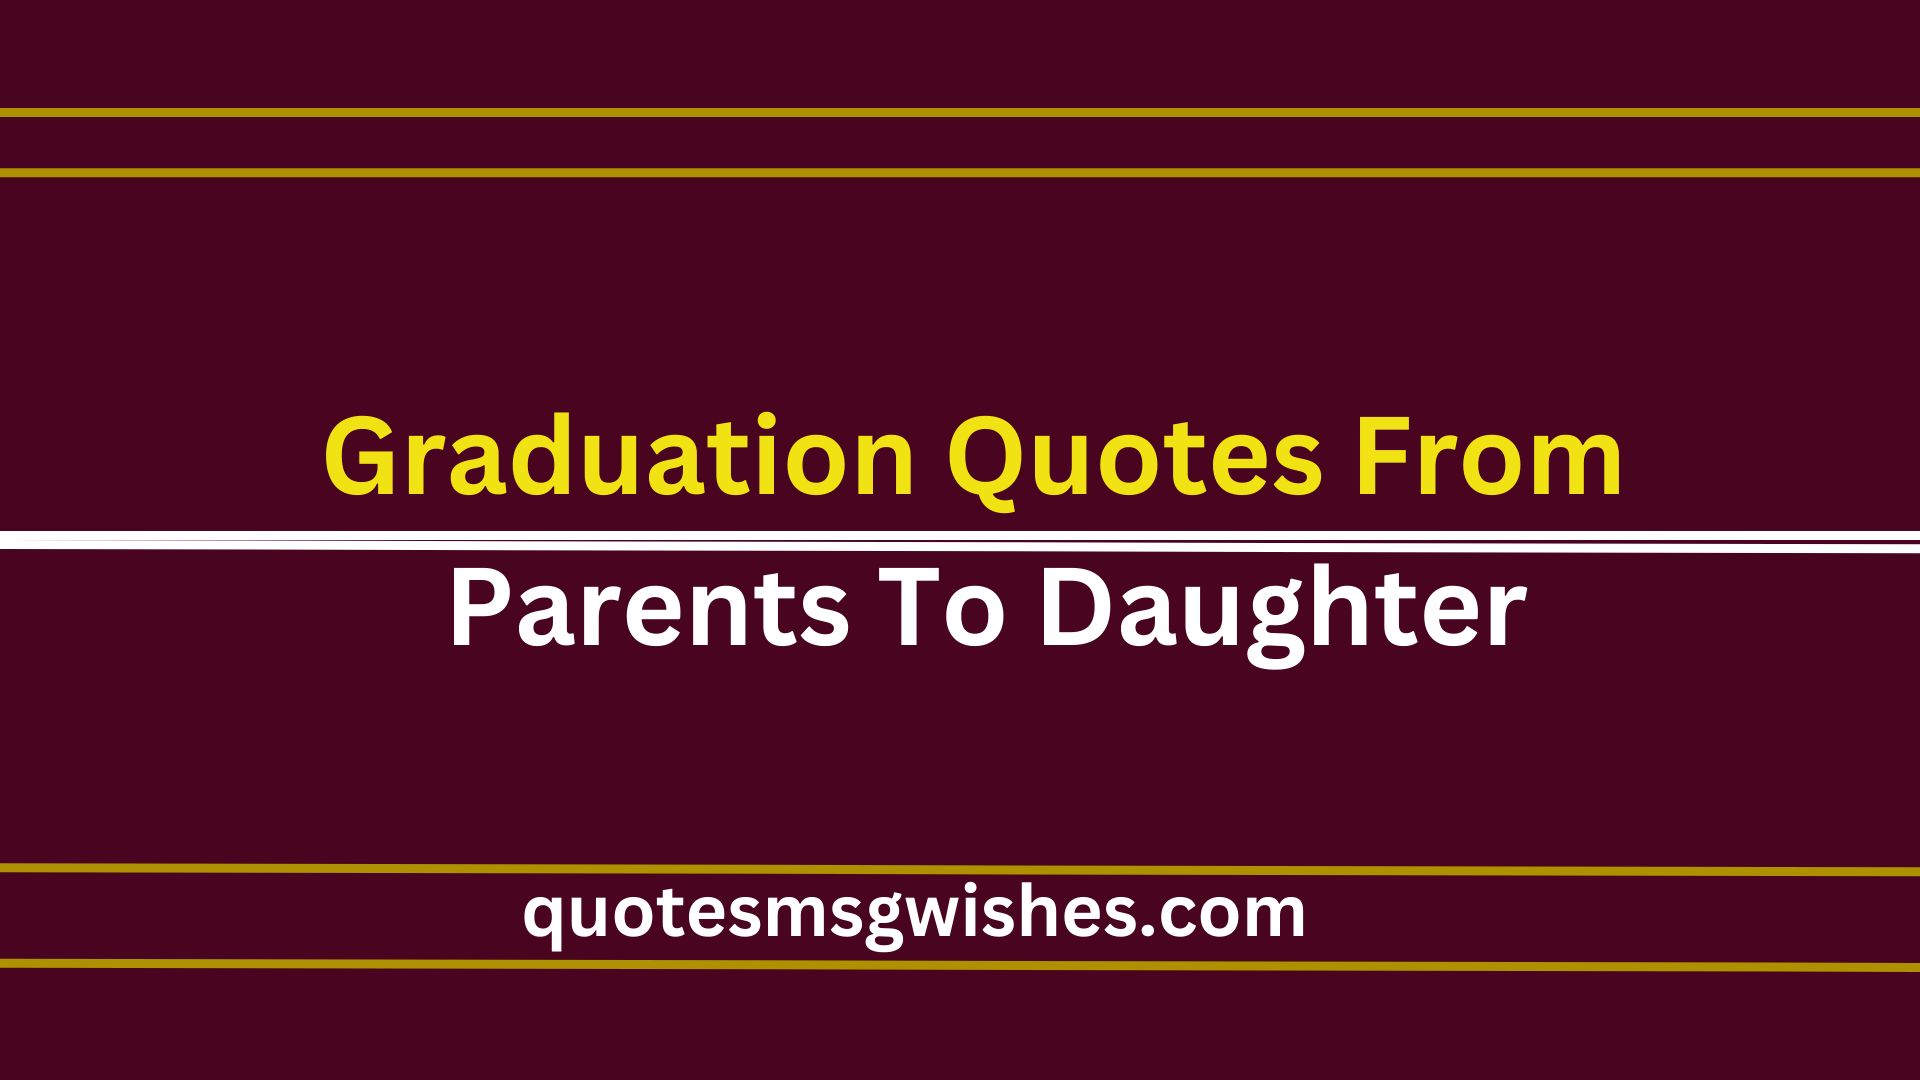 Graduation Quotes From Parents To Daughter